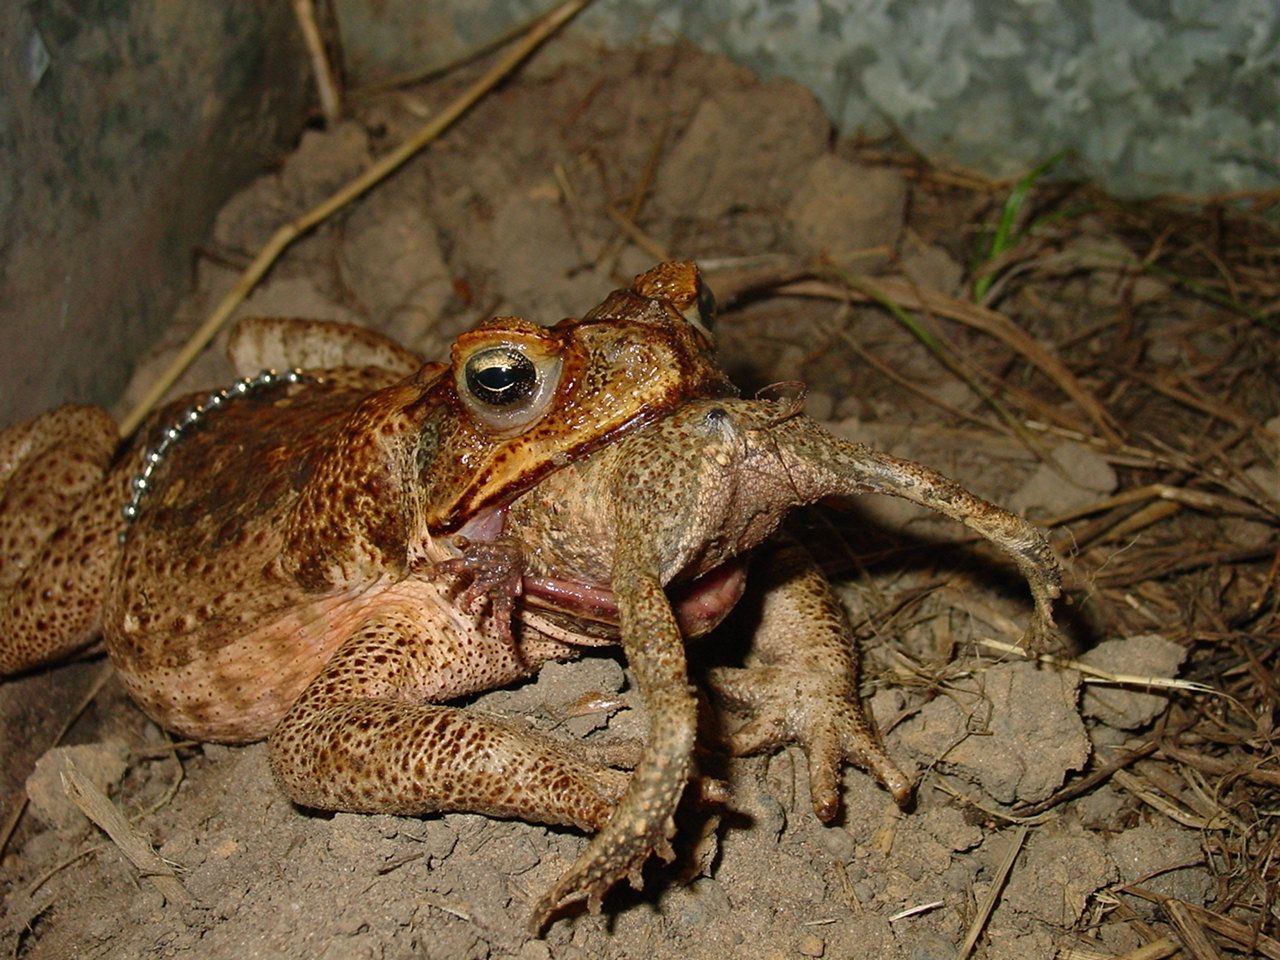 Toad eating a smaller toad.